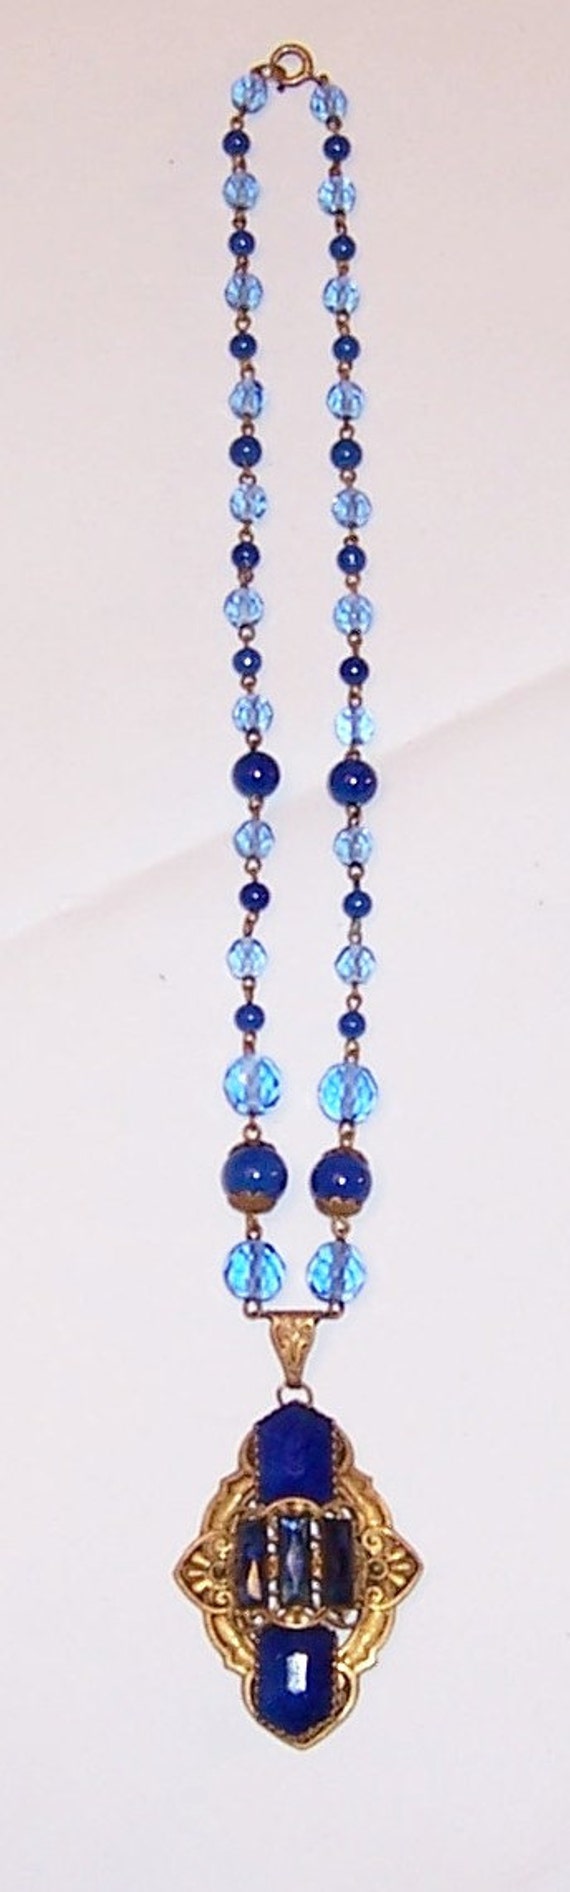 Czech Blue Crystal and Glass Beaded Necklace and P